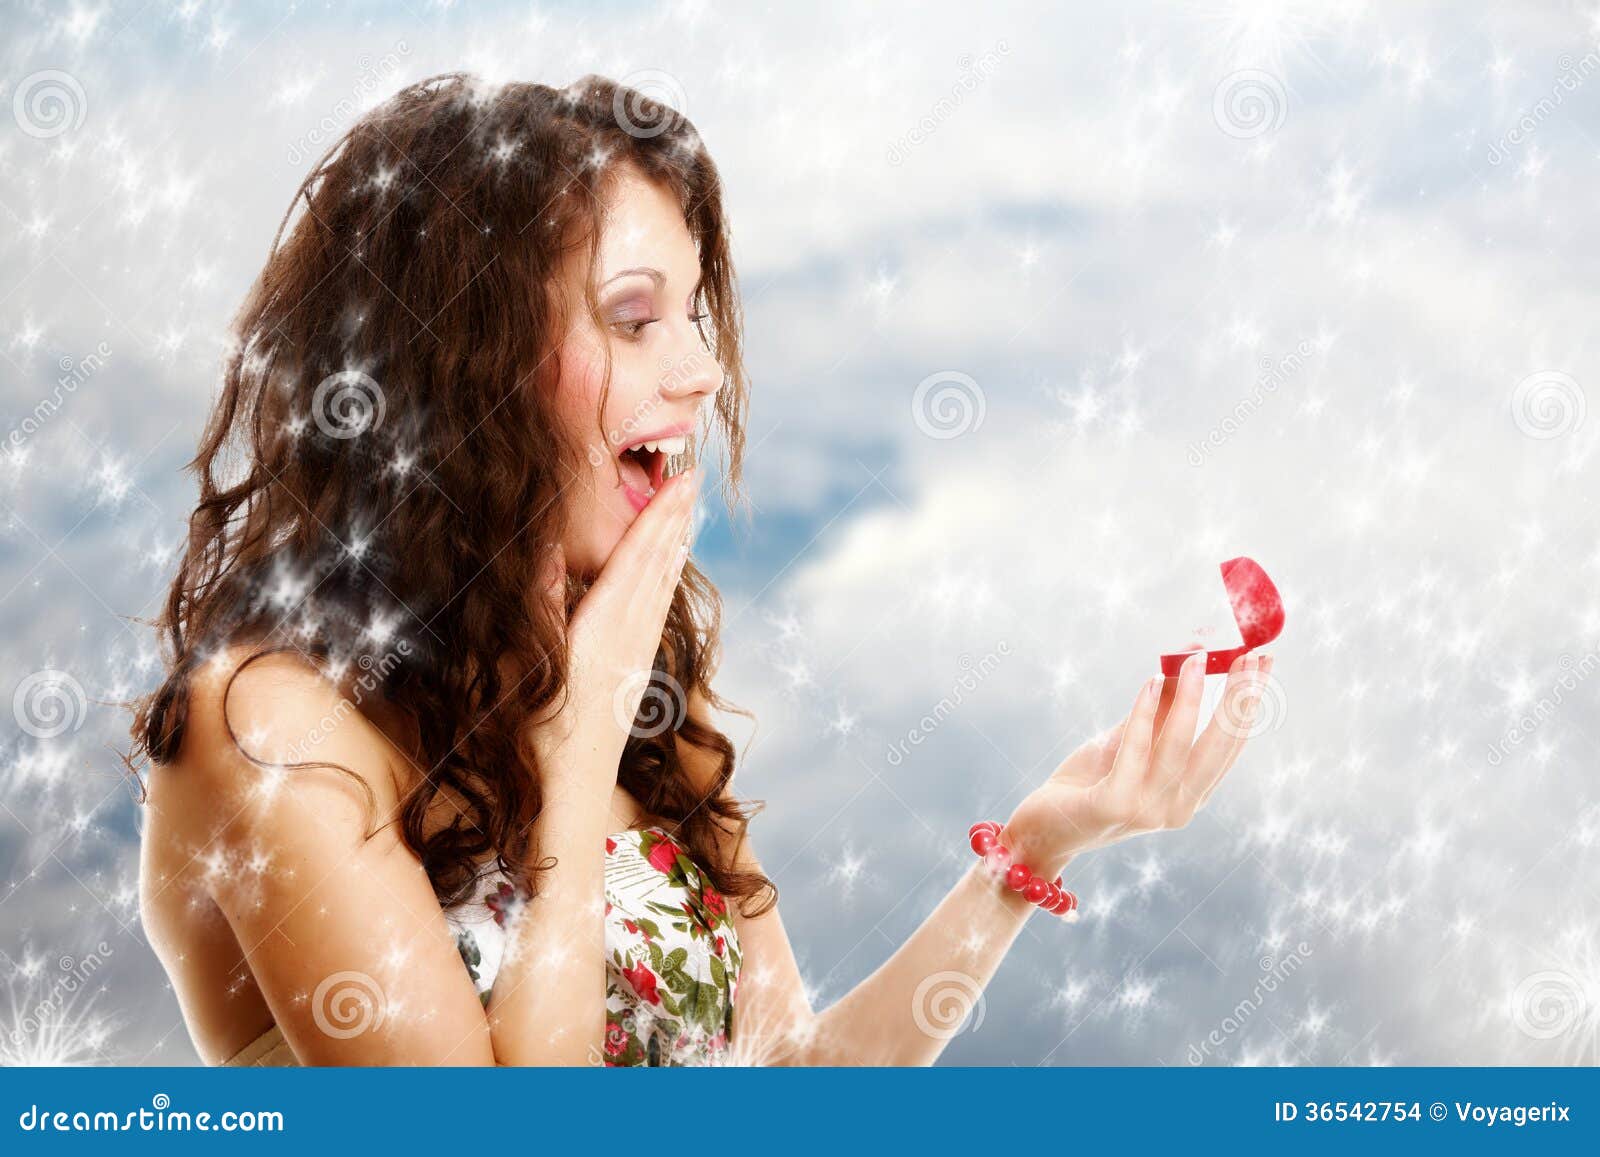 Surprised girl opening red gift box with engagement ring. Winter. Surprised shocked happy girl young woman opening present red heart shaped gift box with engagement ring. Valentines day. Winter snow background.